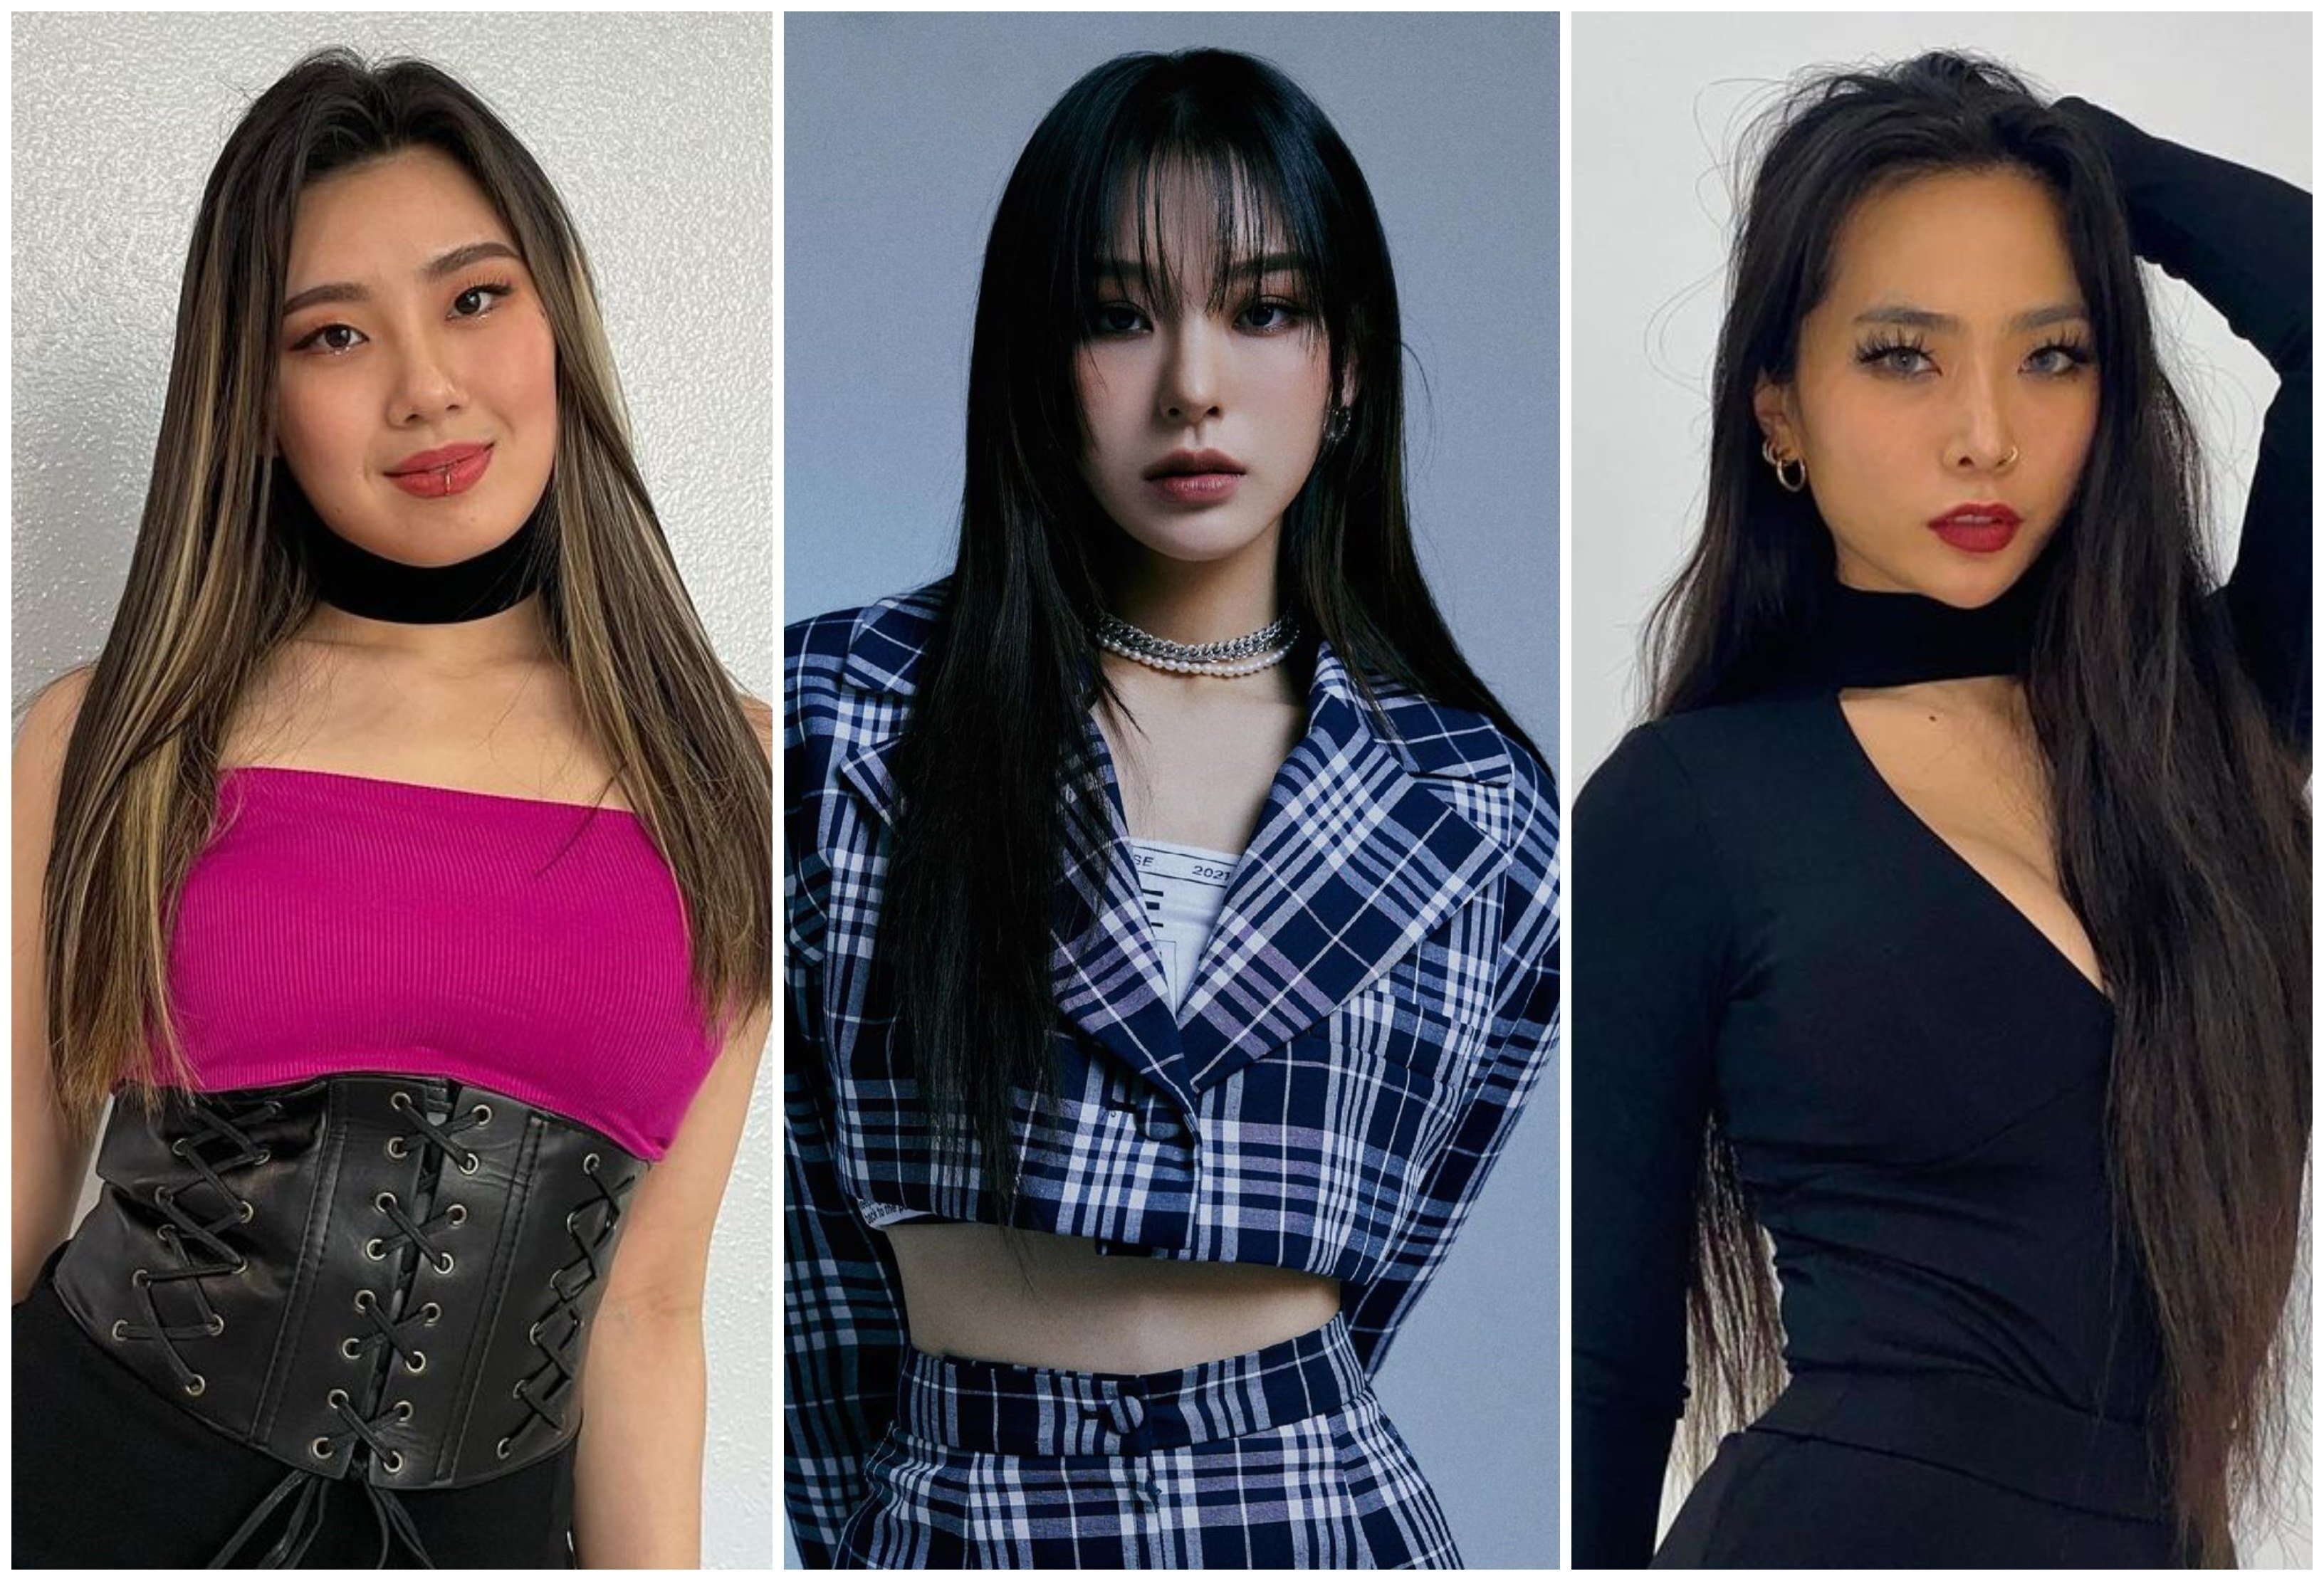 Lee Jung, Noze and Honey J started out as backup dancers and choreographers for famous K-pop acts like Blackpink and Exo, but now they’re stealing the spotlight thanks to TV show Street Woman Fighter. Photos: @leejung_lee, @nozeworld, @__honey.j__/Instagram 